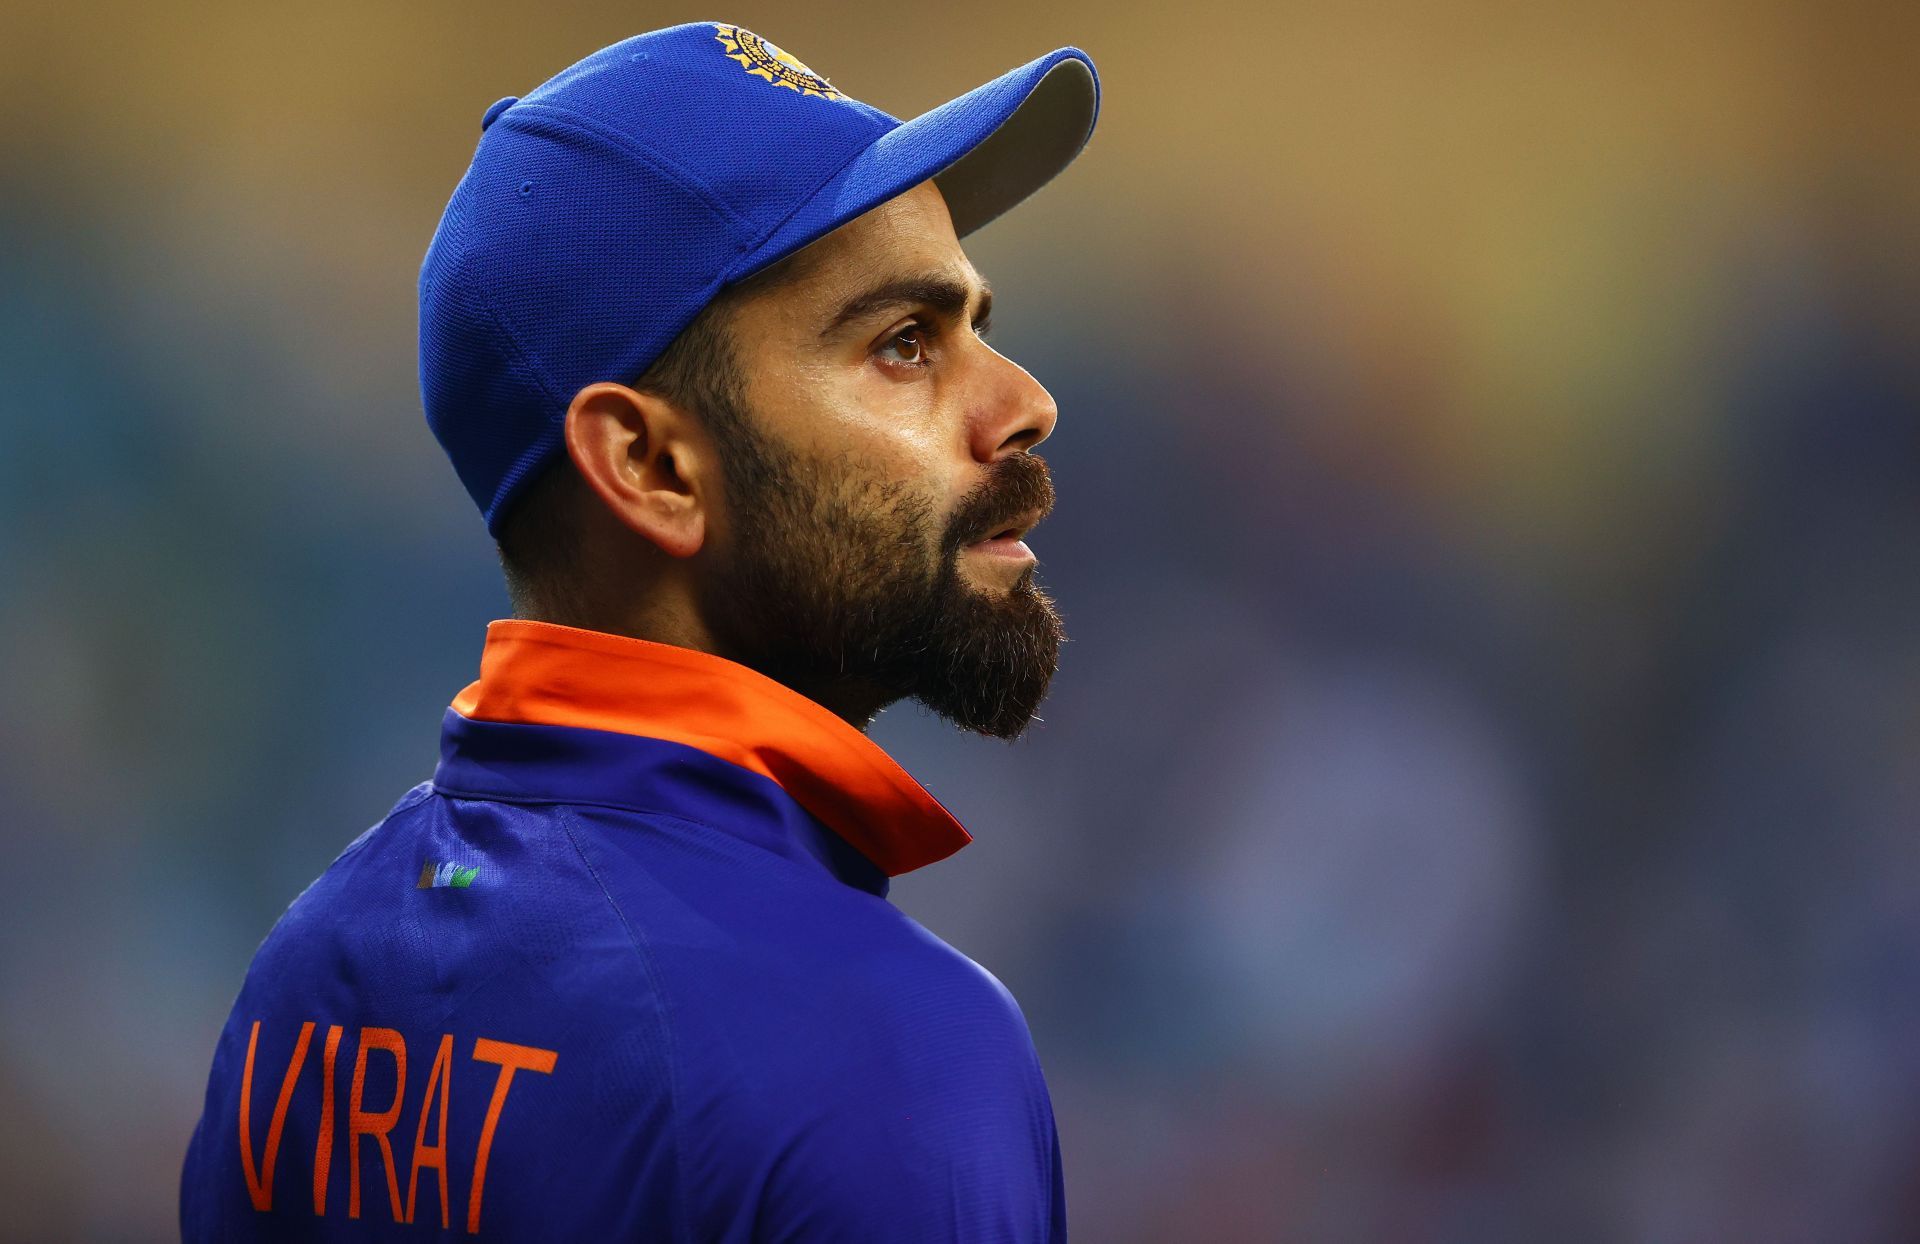 Virat Kohli had pre-announced his decision to give up Team India&#039;s T20I captaincy after the T20 World Cup